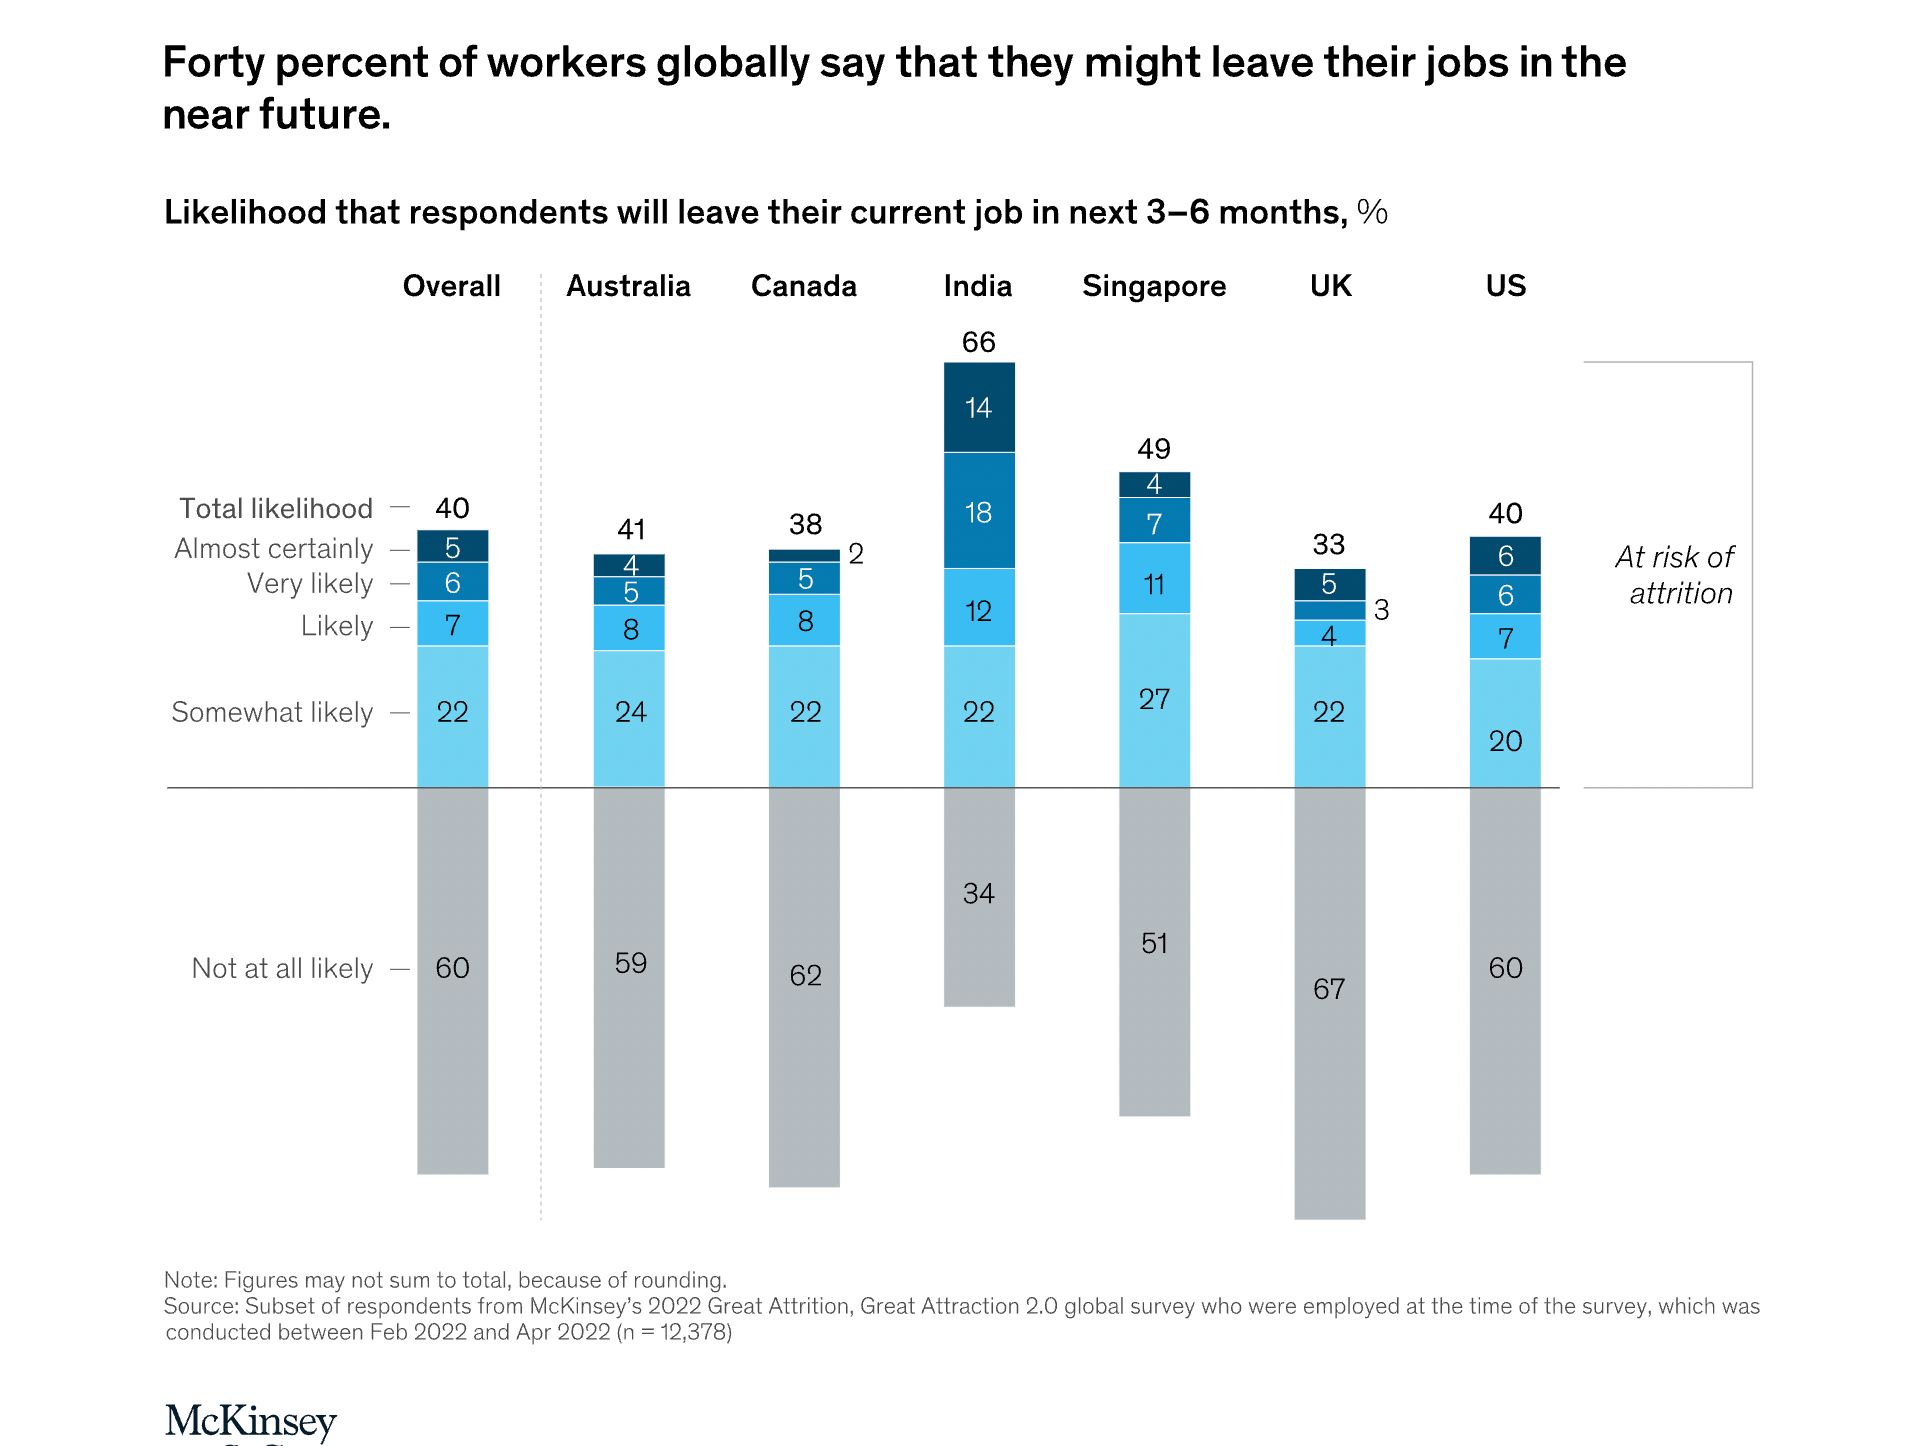 McKinsey Research: 40% of workers globally say that they might leave their jobs in the near future. 